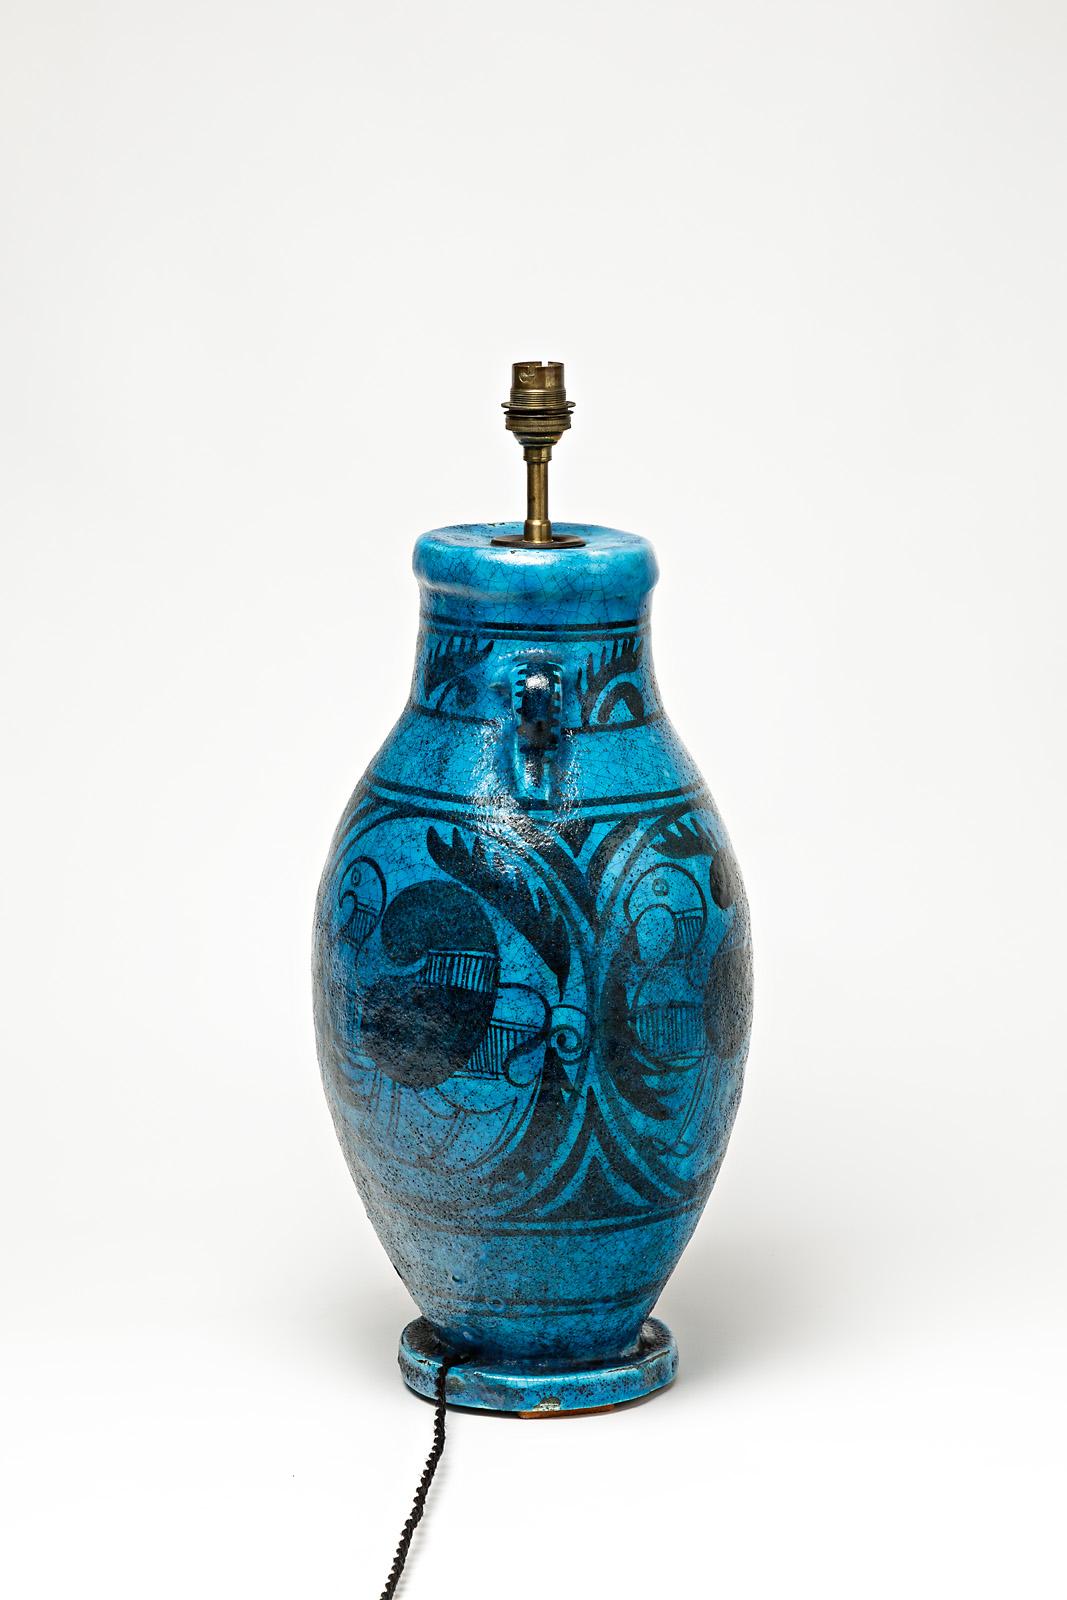 Beaux Arts Ceramic Lamp with Blue and Black Glazes Decoration by Raoul Lachenal, 1930